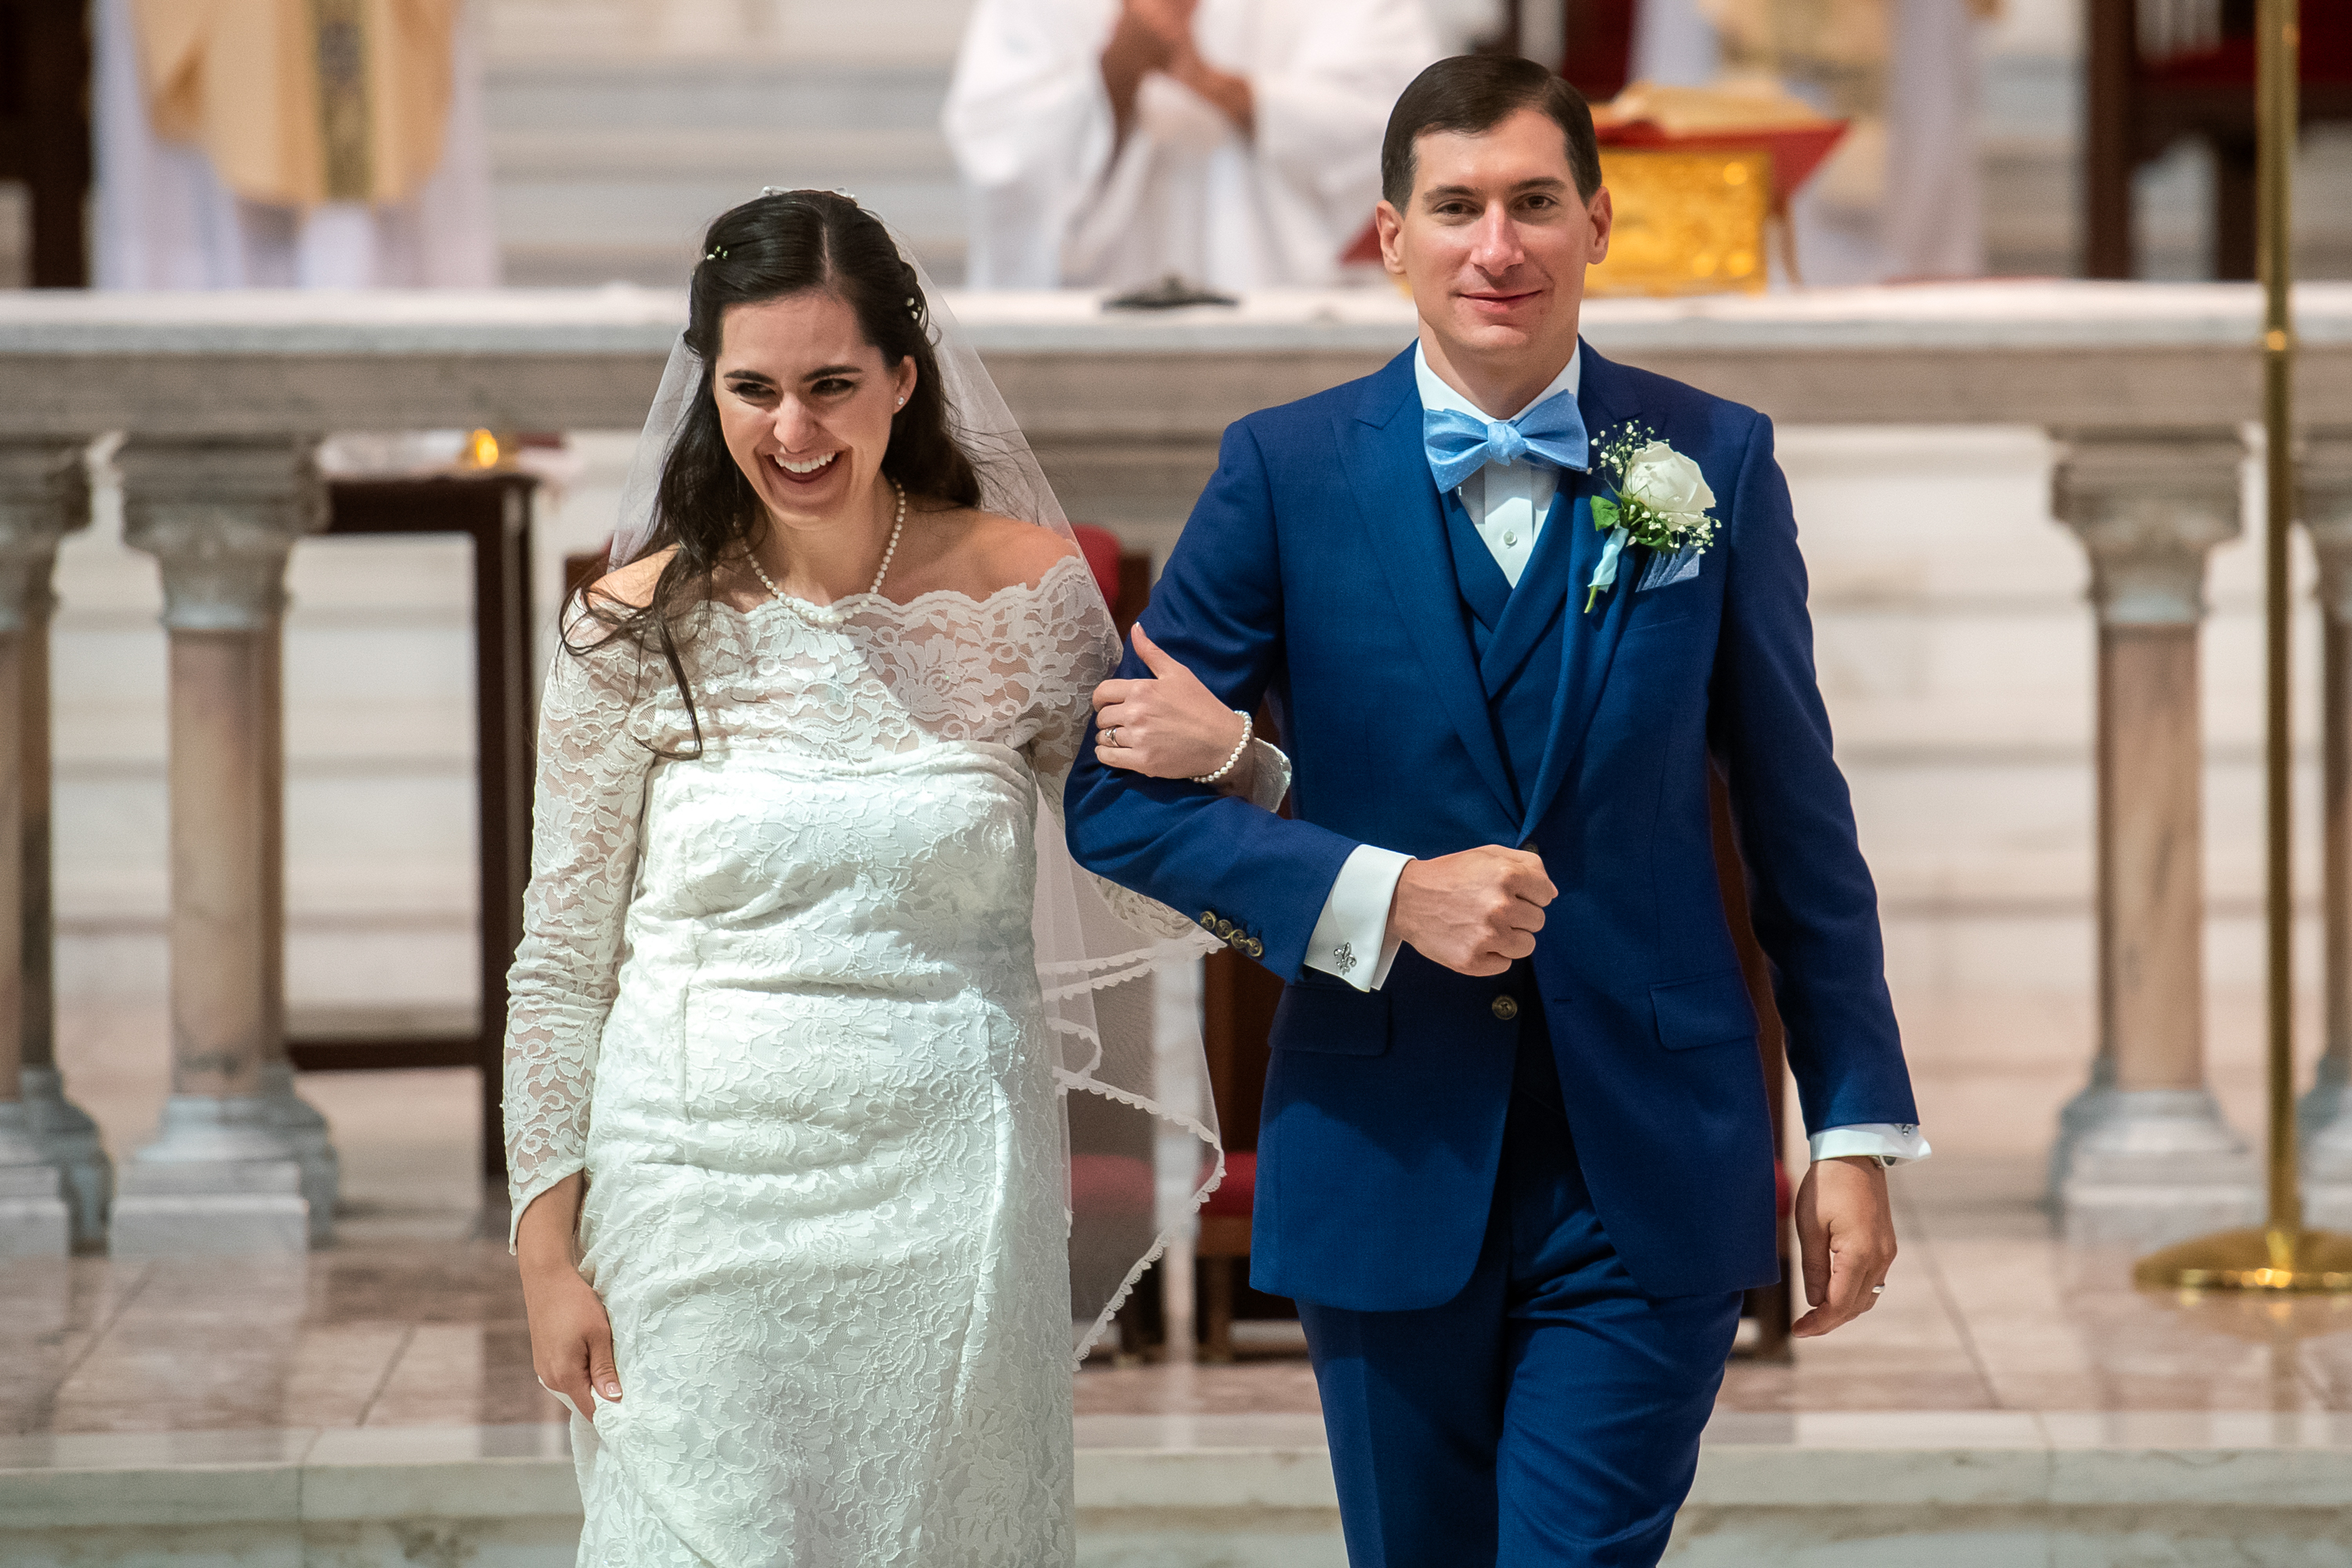 Aurora and Yann process out after their wedding at the Cathedral Basilica of the Immaculate Conception in Denver, Colorado.